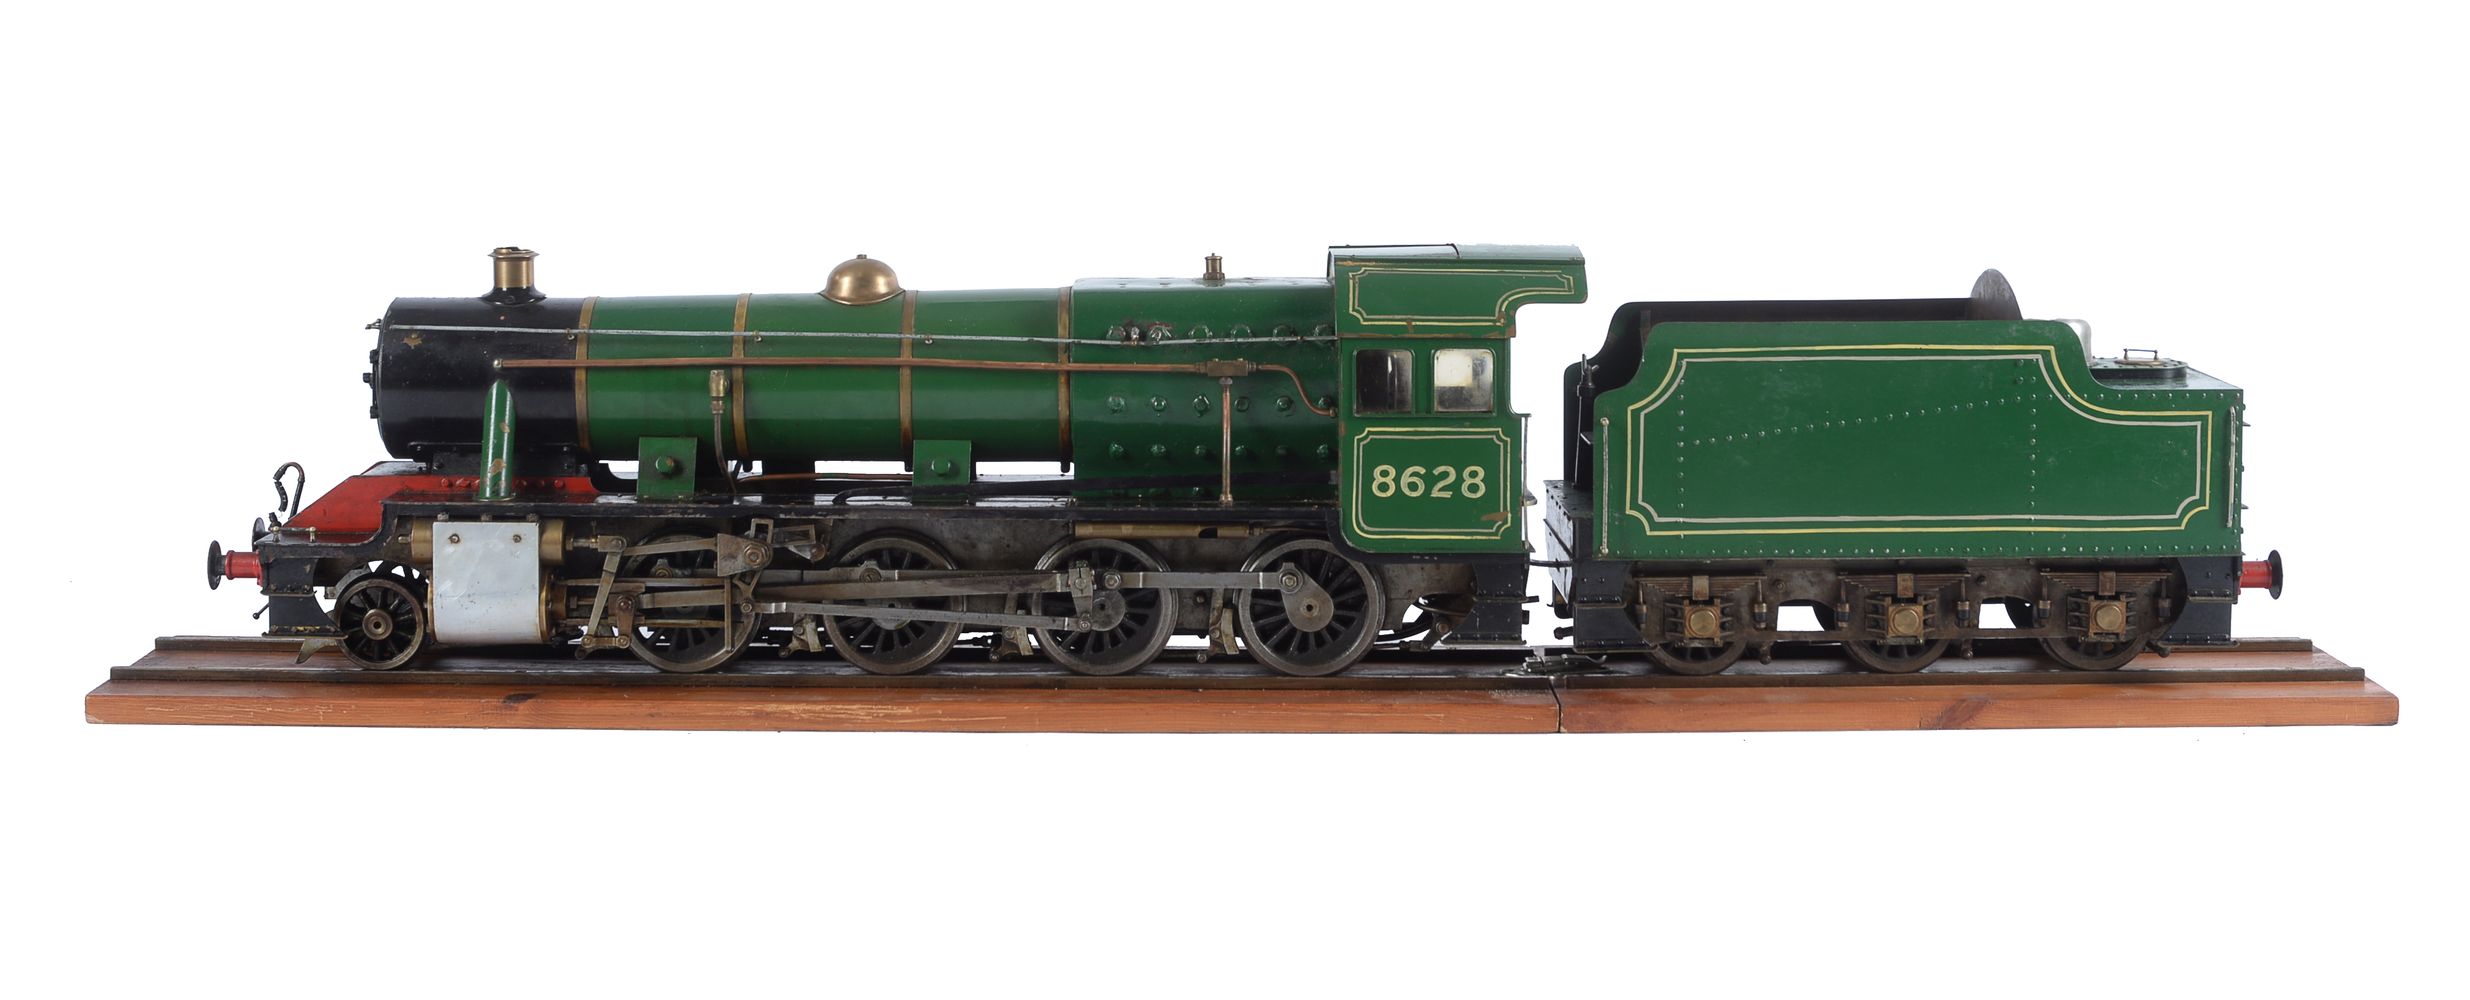 A well engineered 3 ½ inch gauge model of a Class 8F heavy freight 2-8-0 tender locomotive No 8628